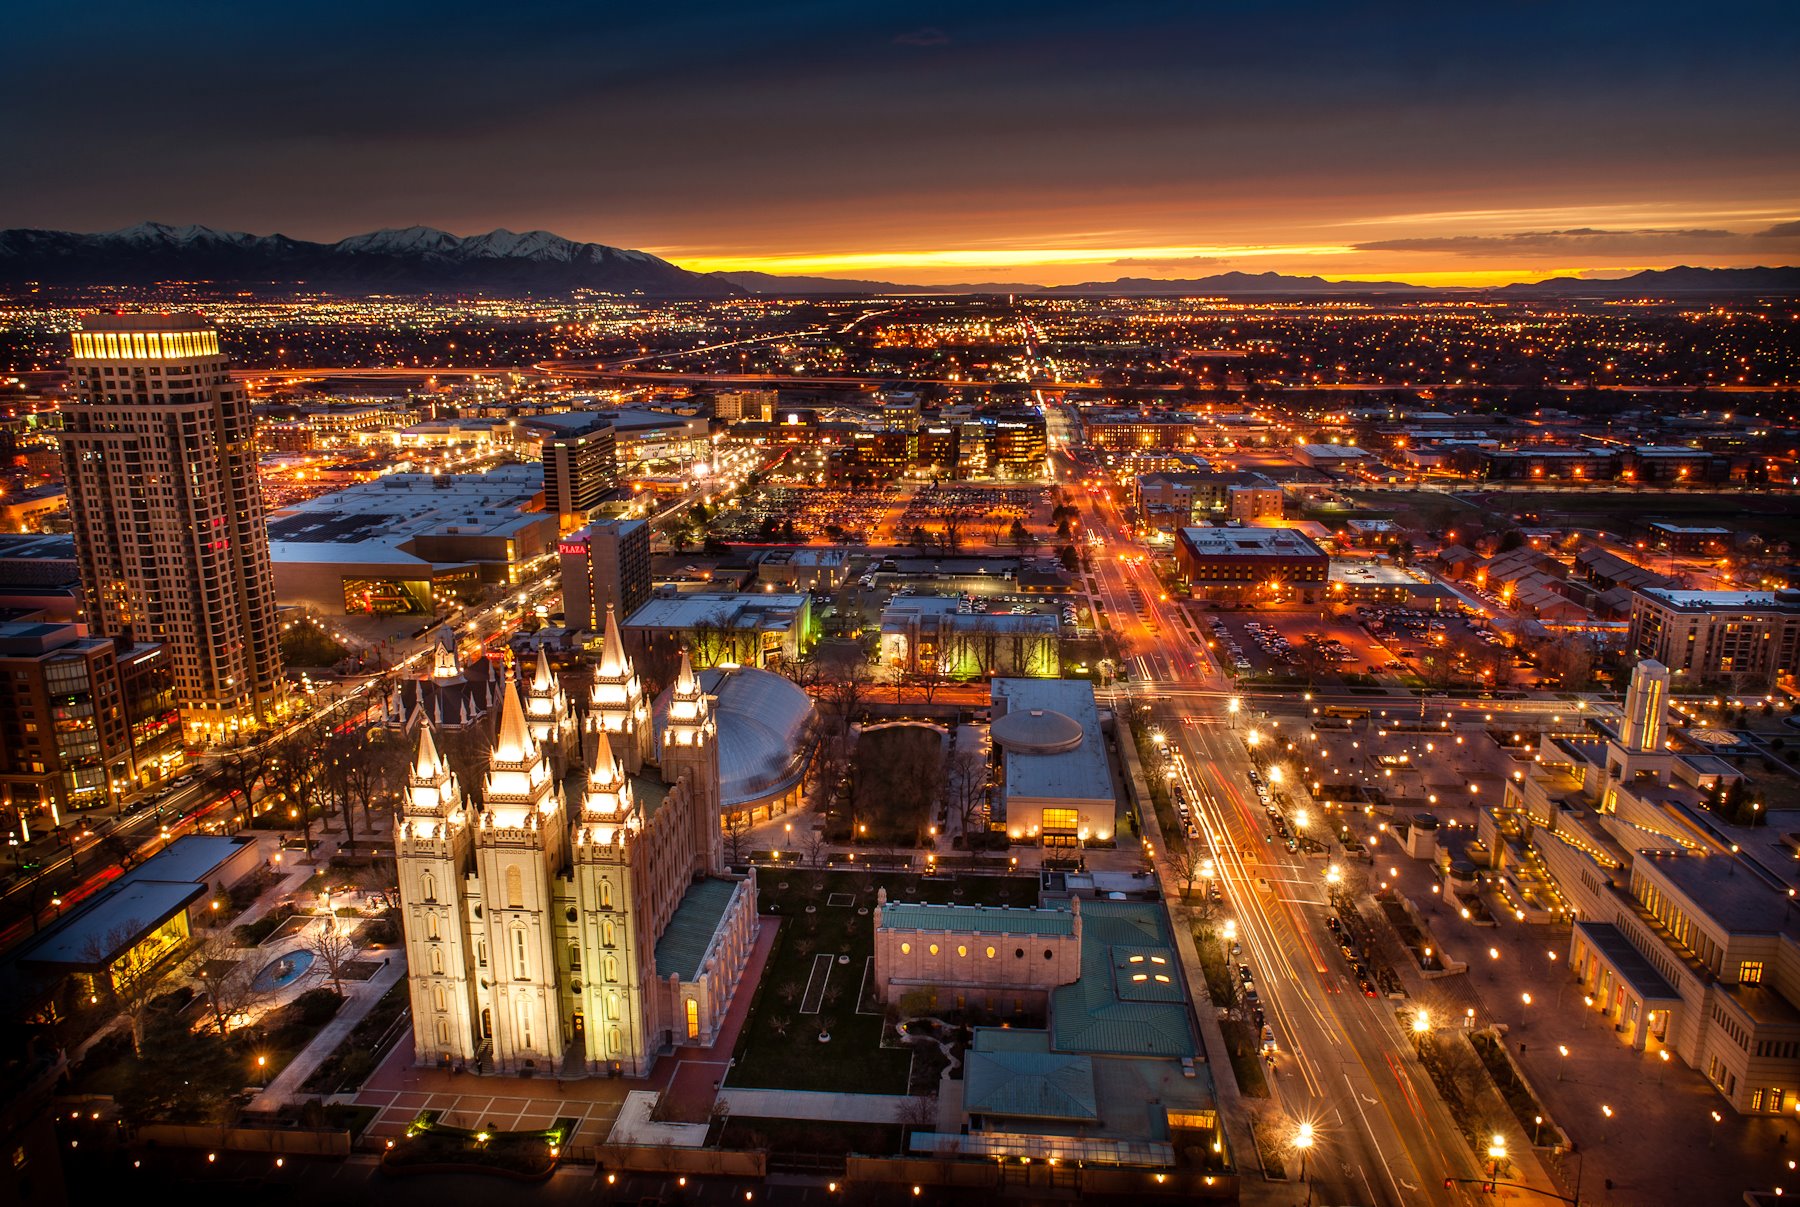 Downtown Salt Lake City at Night (image by dav.d photography)